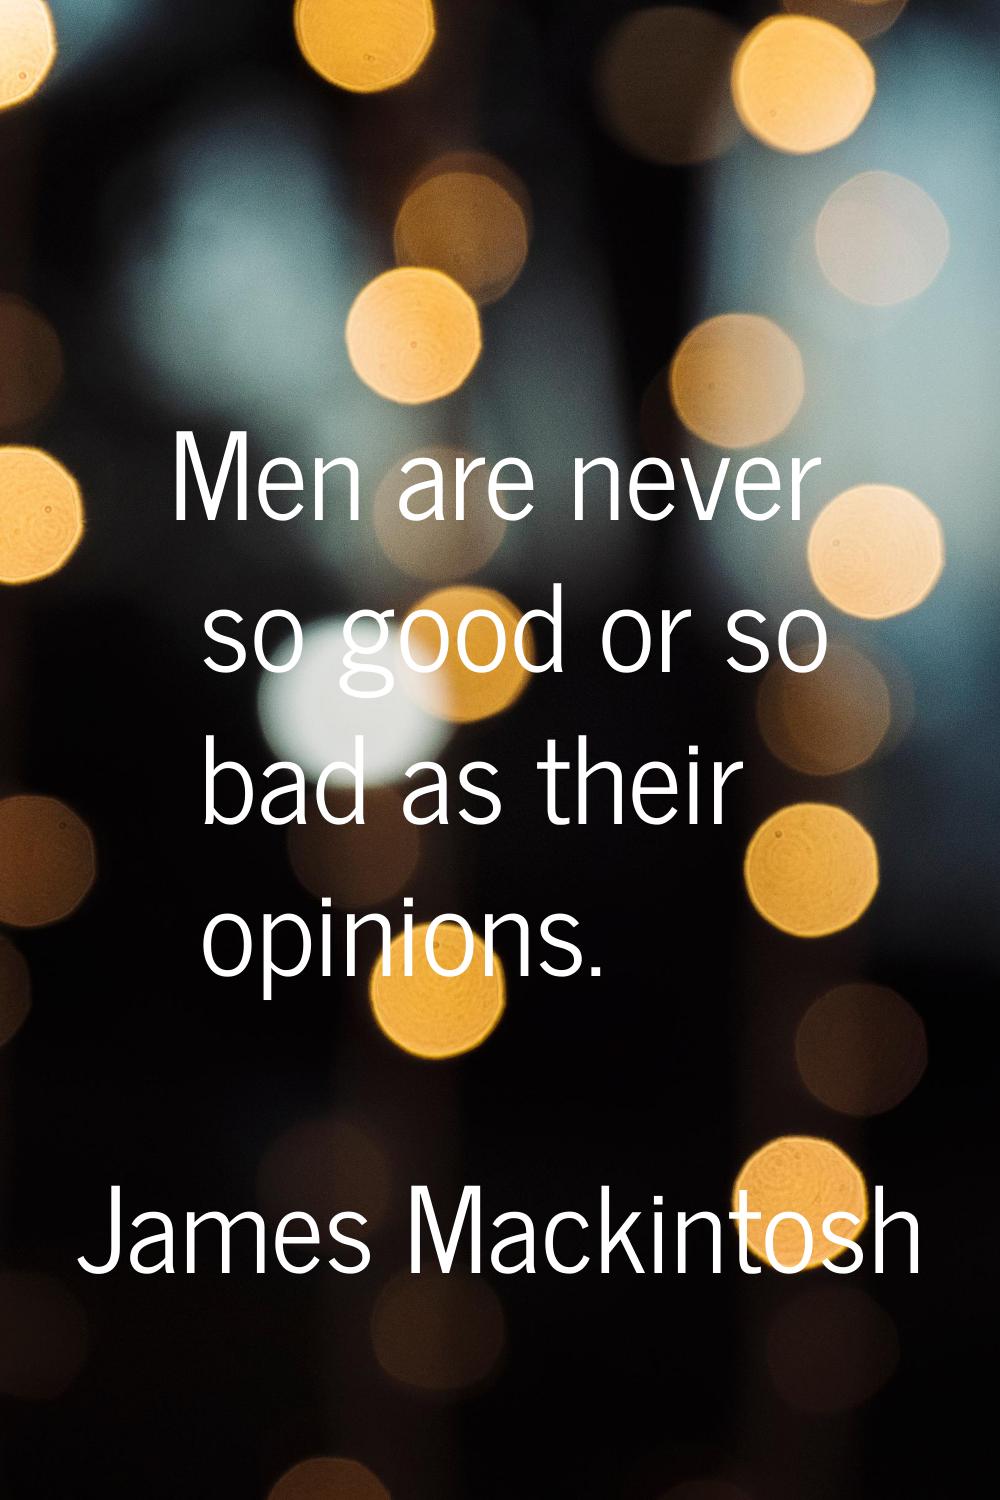 Men are never so good or so bad as their opinions.